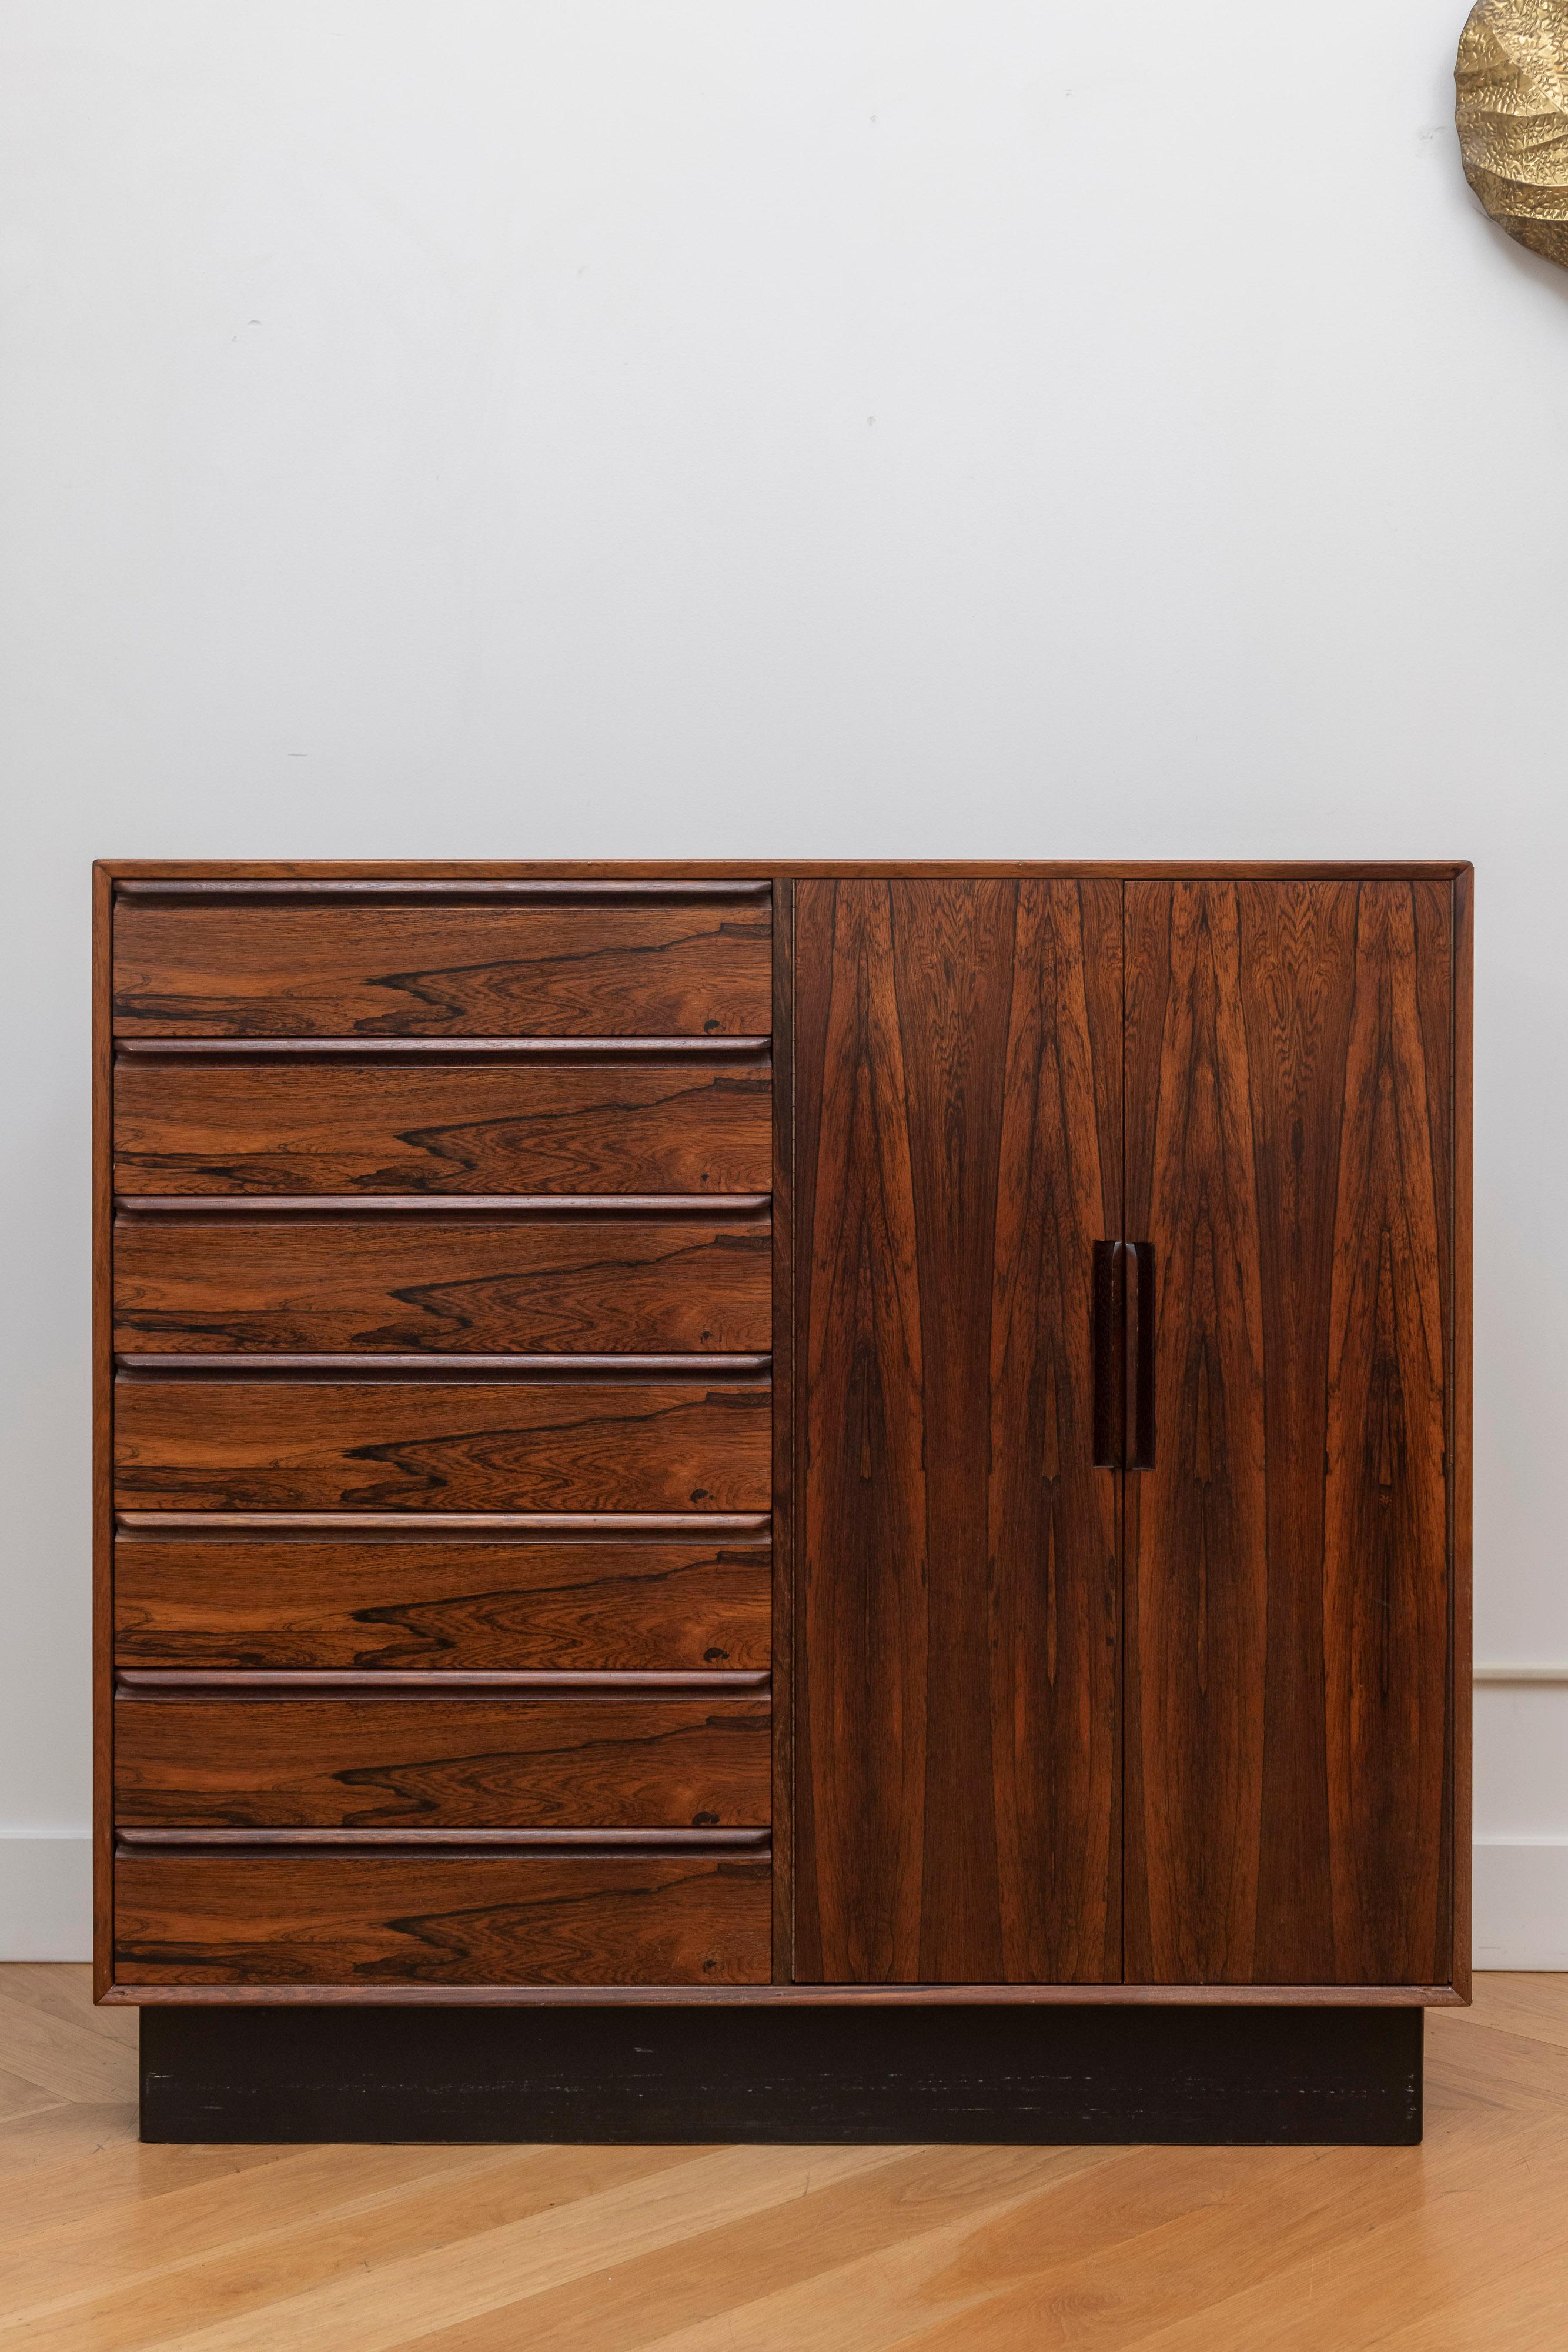 Midcentury Scandinavian Modern gentleman's wardrobe chest by Westnofa. This dresser features a tall bank of seven drawers flanked by two doors which open to reveal seven interior drawers.